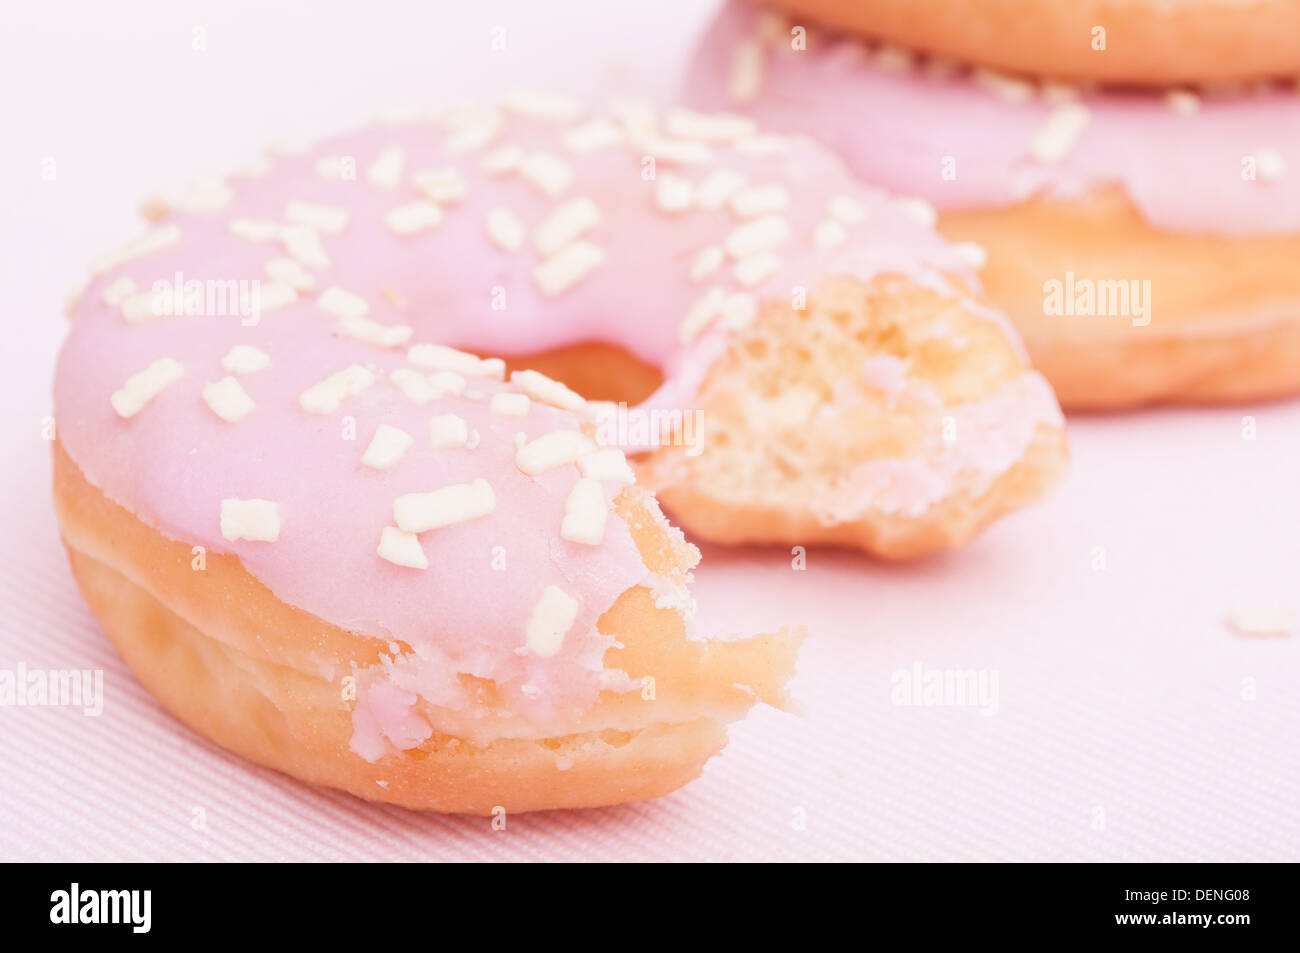 Closeup of Homemade Donuts with Pink Icing - Shallow Depth of Field Stock Photo